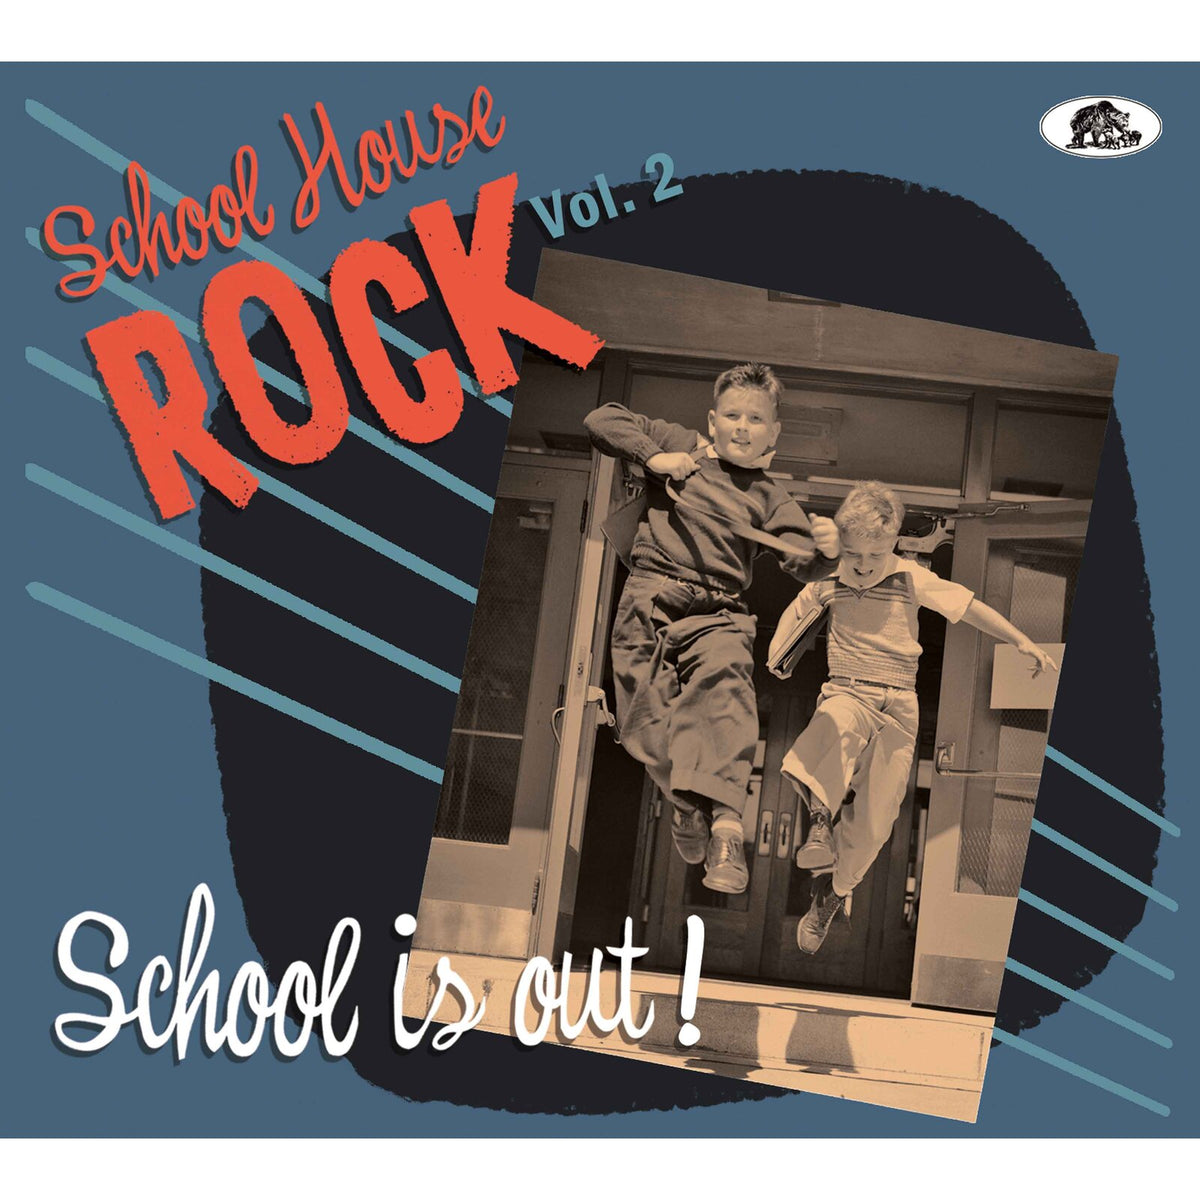 Various Artists - School House Rock Vol. 2 School is Out - BCD17681